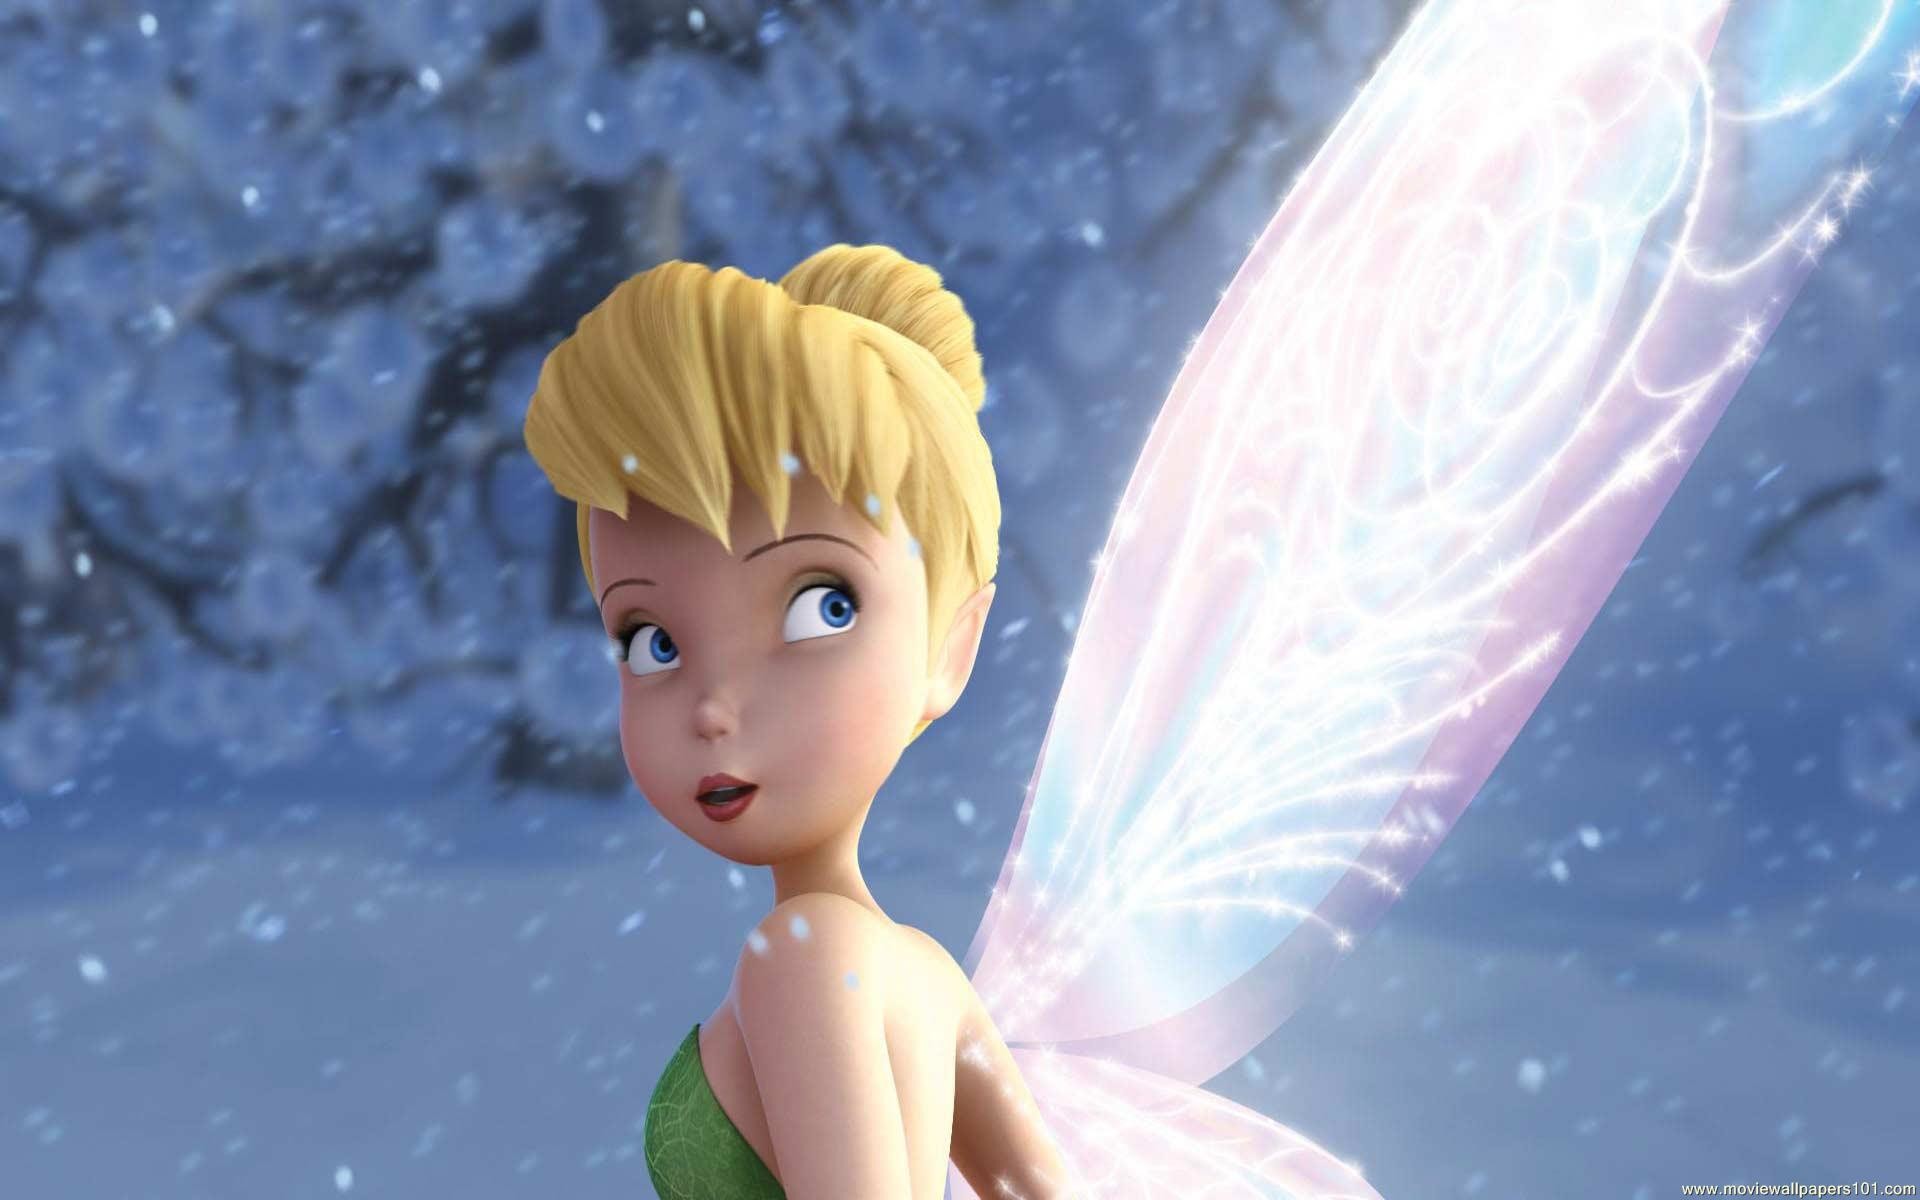 1920x1200 More Wallpapers of TinkerBell and the Secret of the Wings